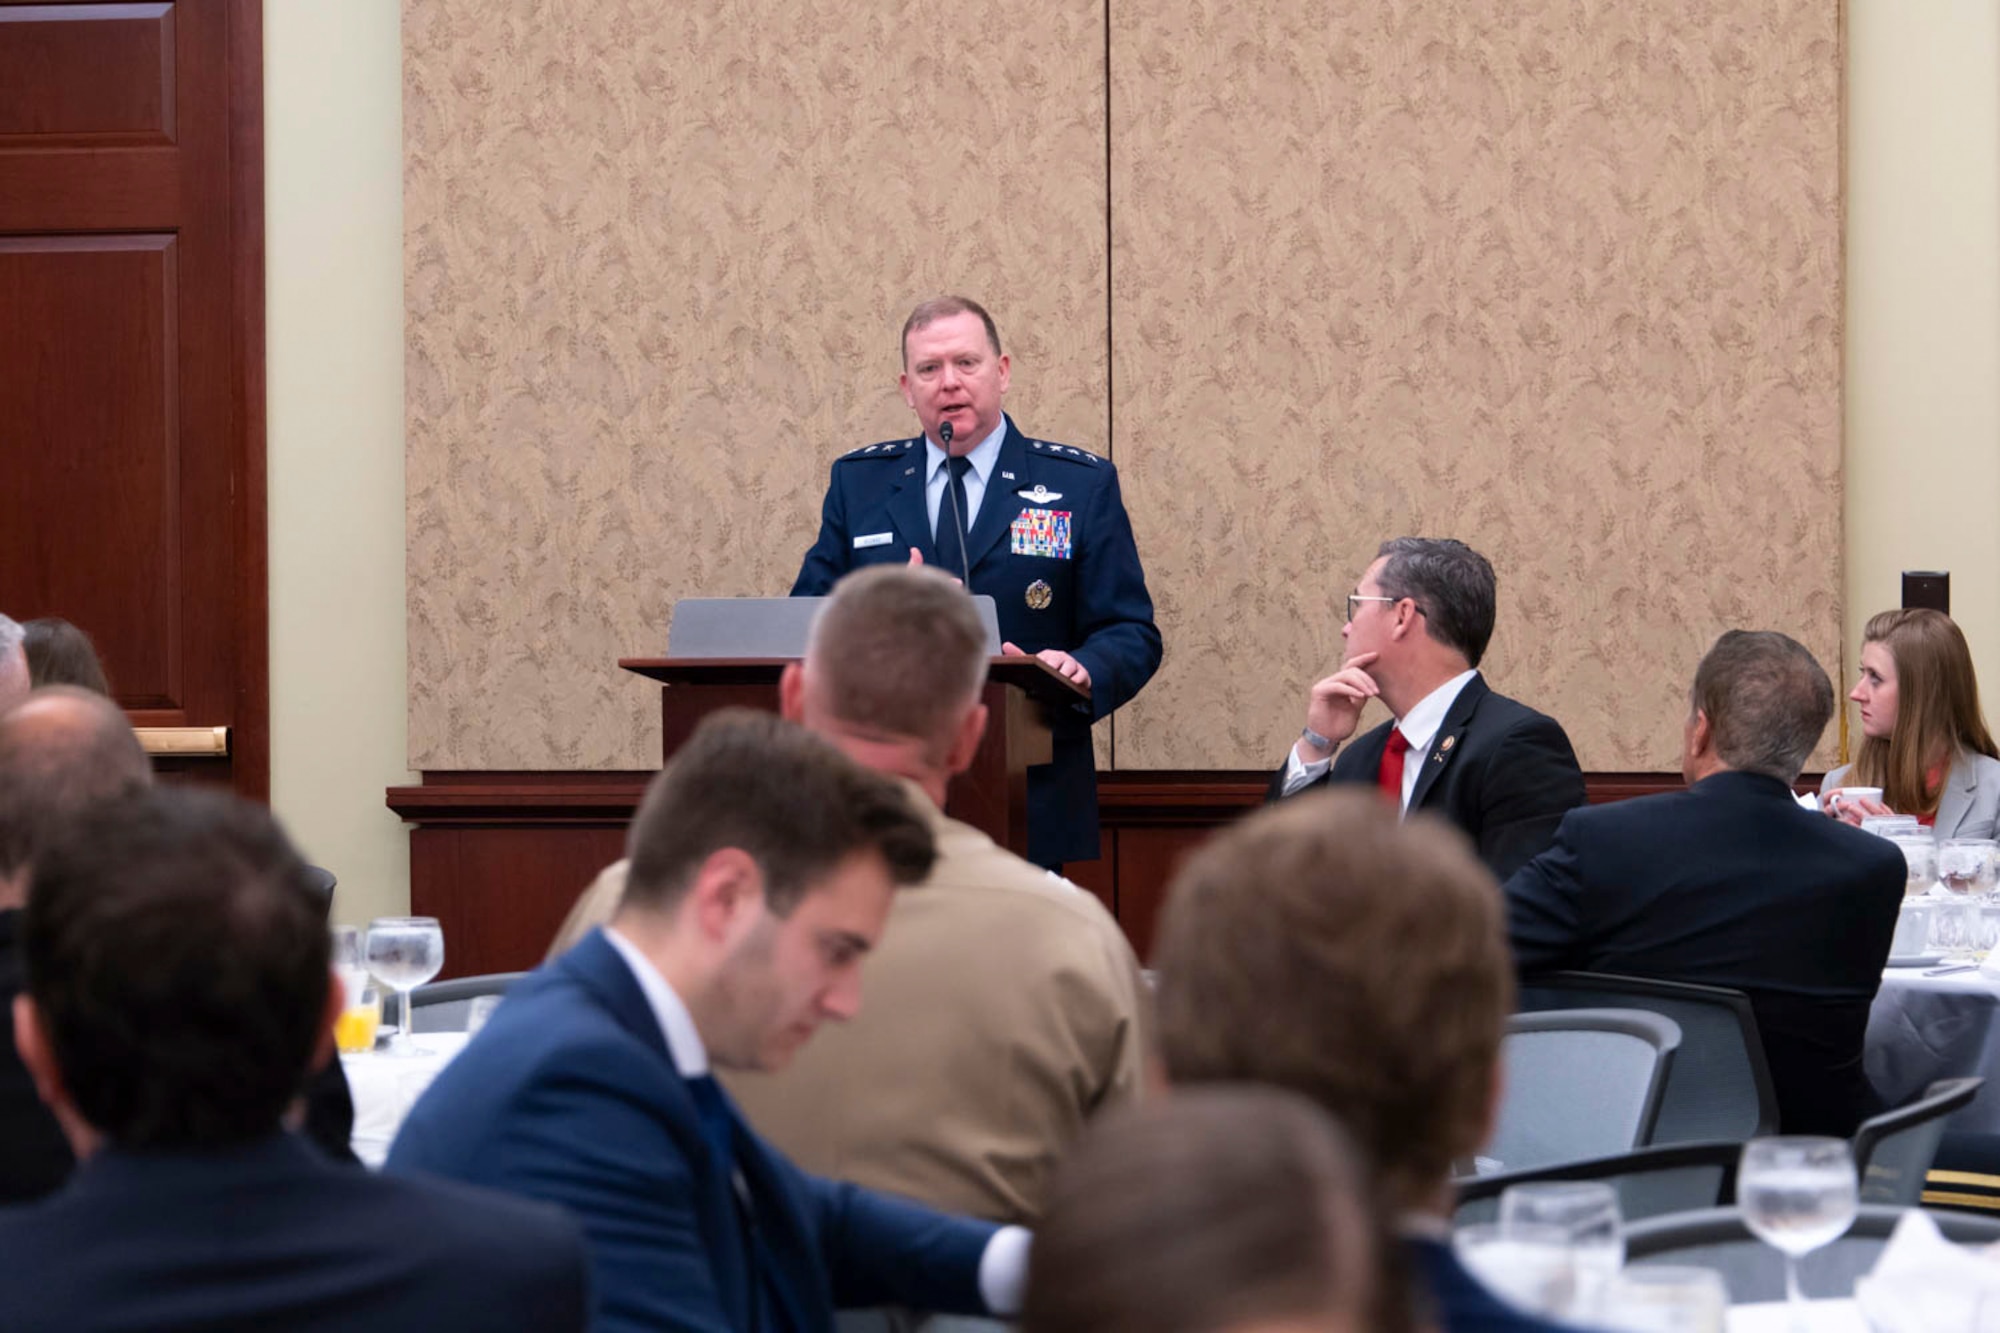 Lt. Gen. Richard W. Scobee, Chief of Air Force Reserve, Headquarters U.S. Air Force, Washington, D.C., and Commander, Air Force Reserve Command, Robins Air Force Base, Georgia, speaks to the audience at the House National Guard and Reserve Component Caucus Breakfast at the U.S. Capitol, Washington D.C., April 30, 2019. Senior leaders from each component discussed their top issues and Scobee highlighted the importance of retaining Airmen in today’s Air Force Reserve. (U.S. Air Force photo by SrA Andreaa Phillips)